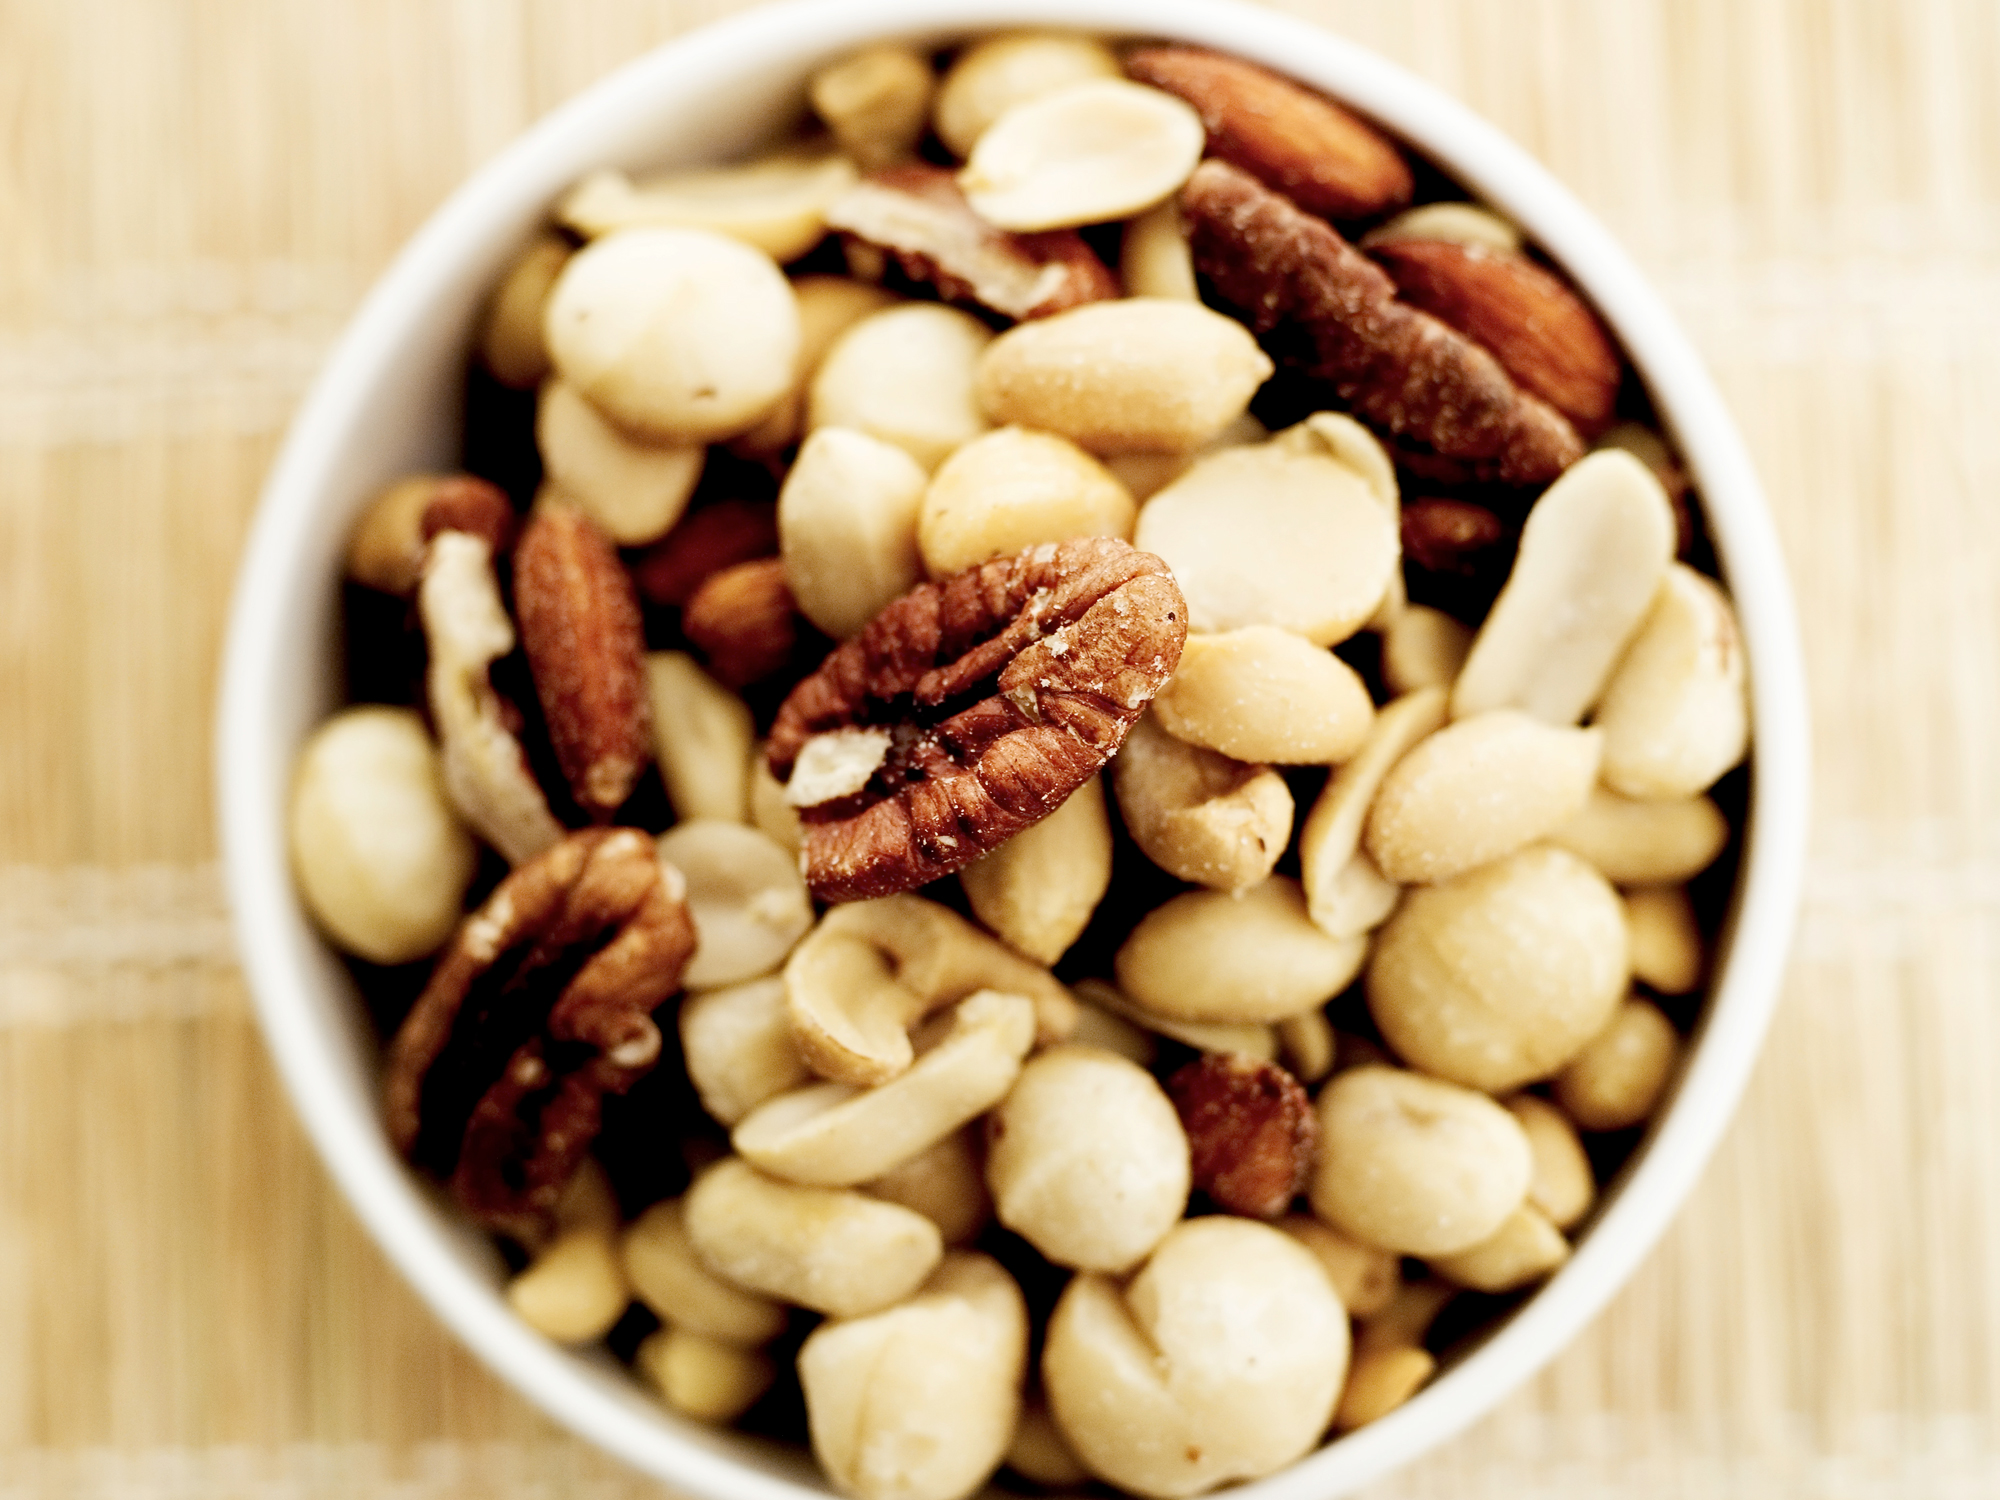 5 ways nuts reduce cancer risk, heart disease and more